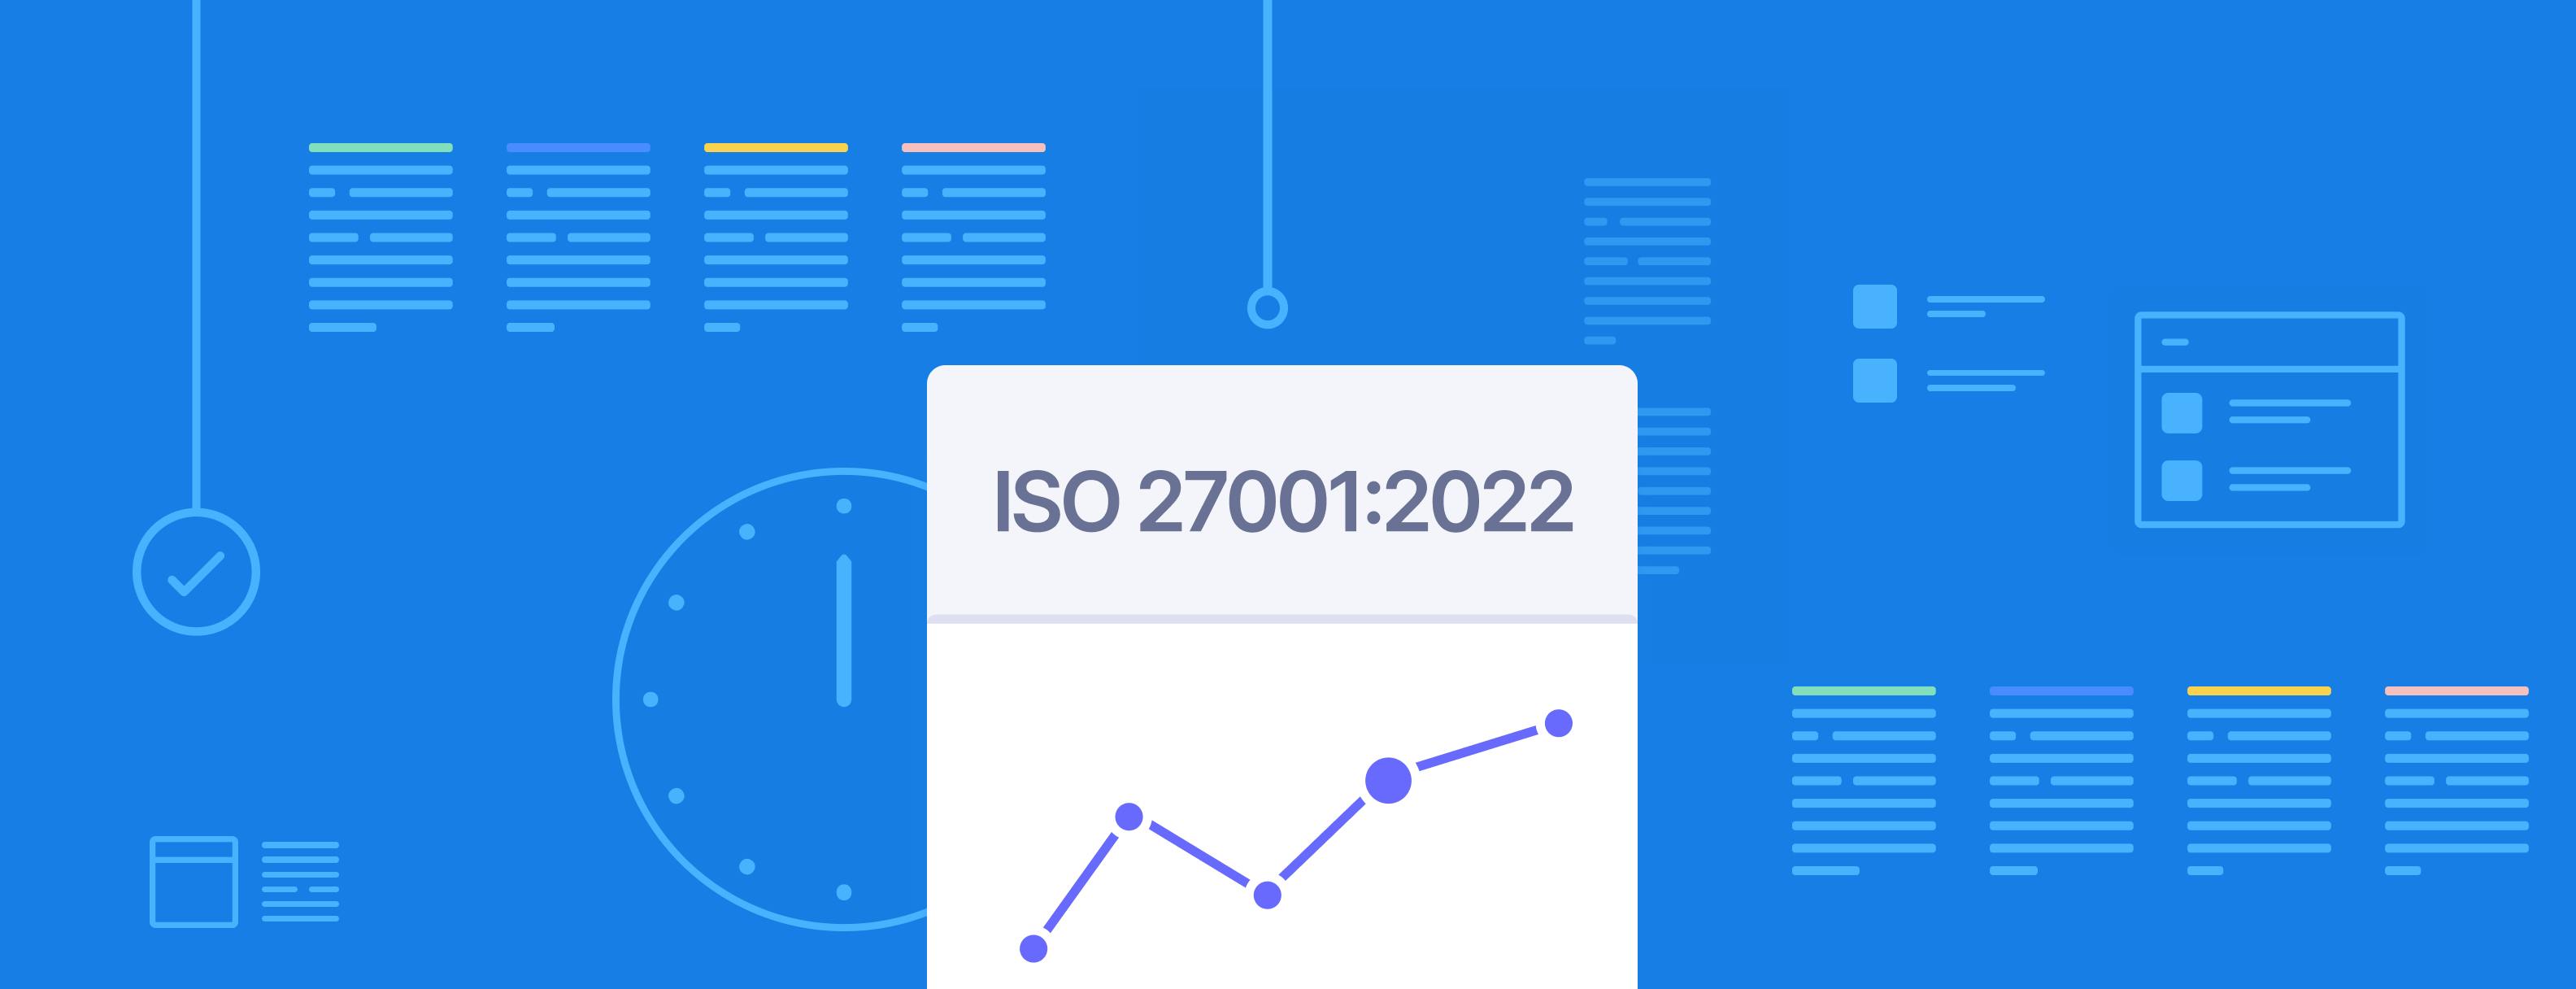 ISO 27001:2022 Updates Simplified: The Major Changes You Need to Know